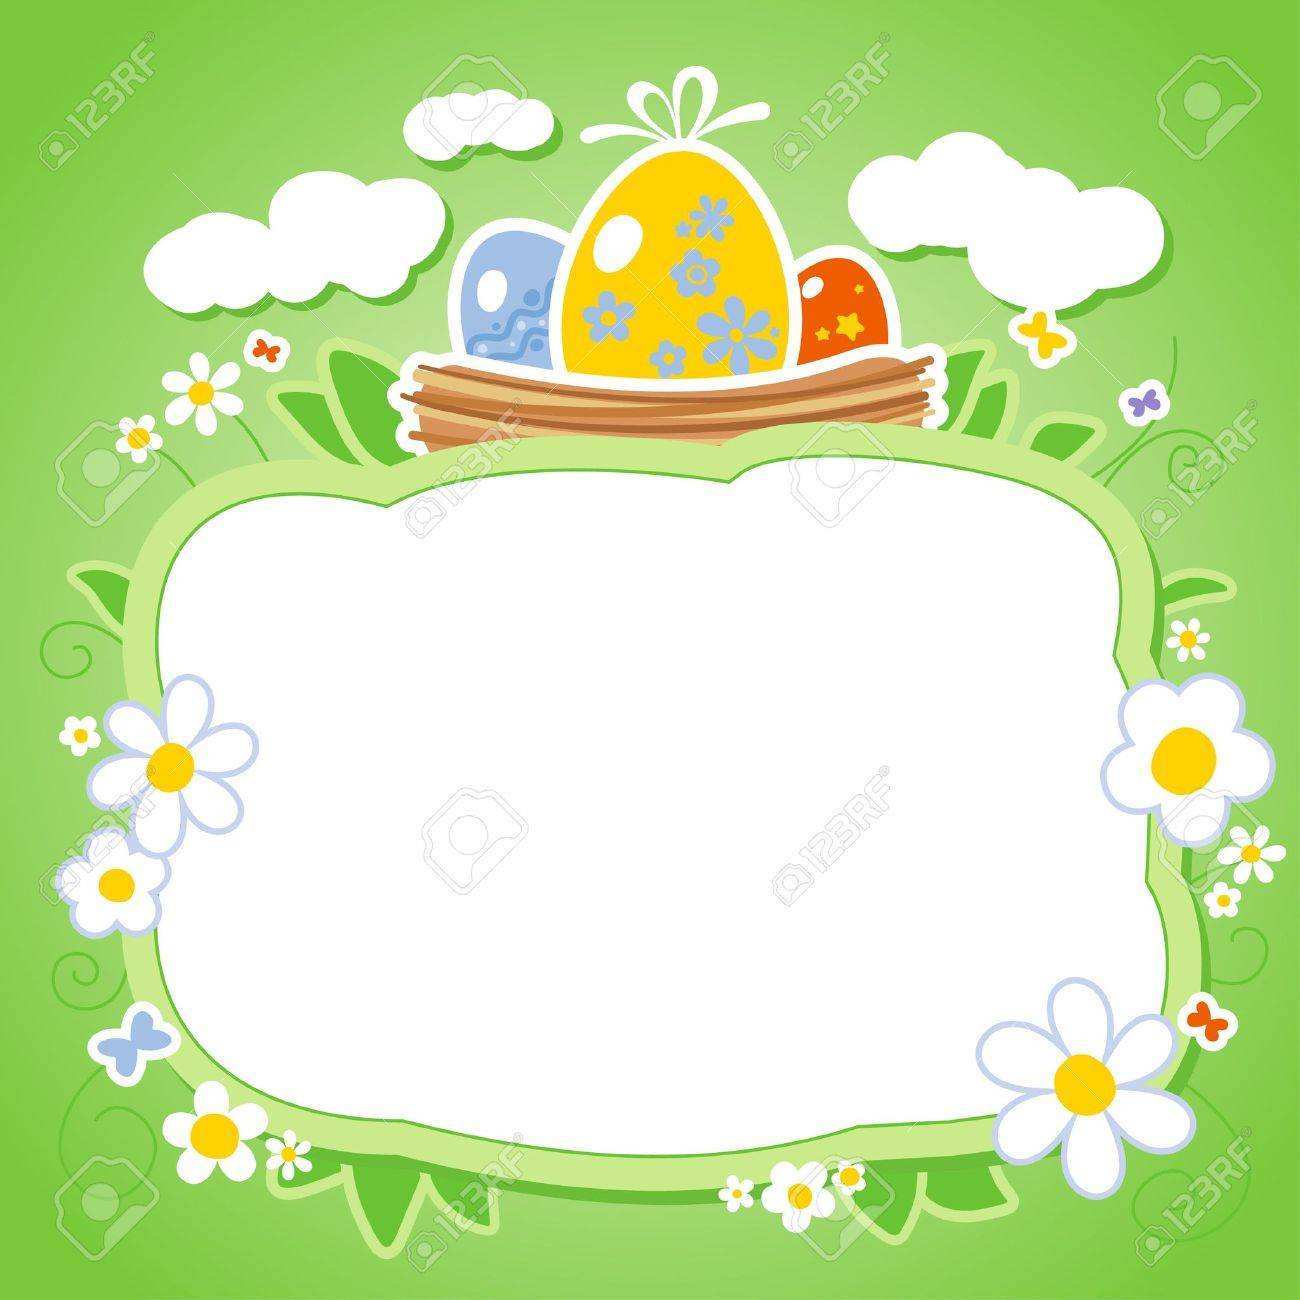 41 Report Easter Card Photo Templates For Free by Easter Card Photo Templates